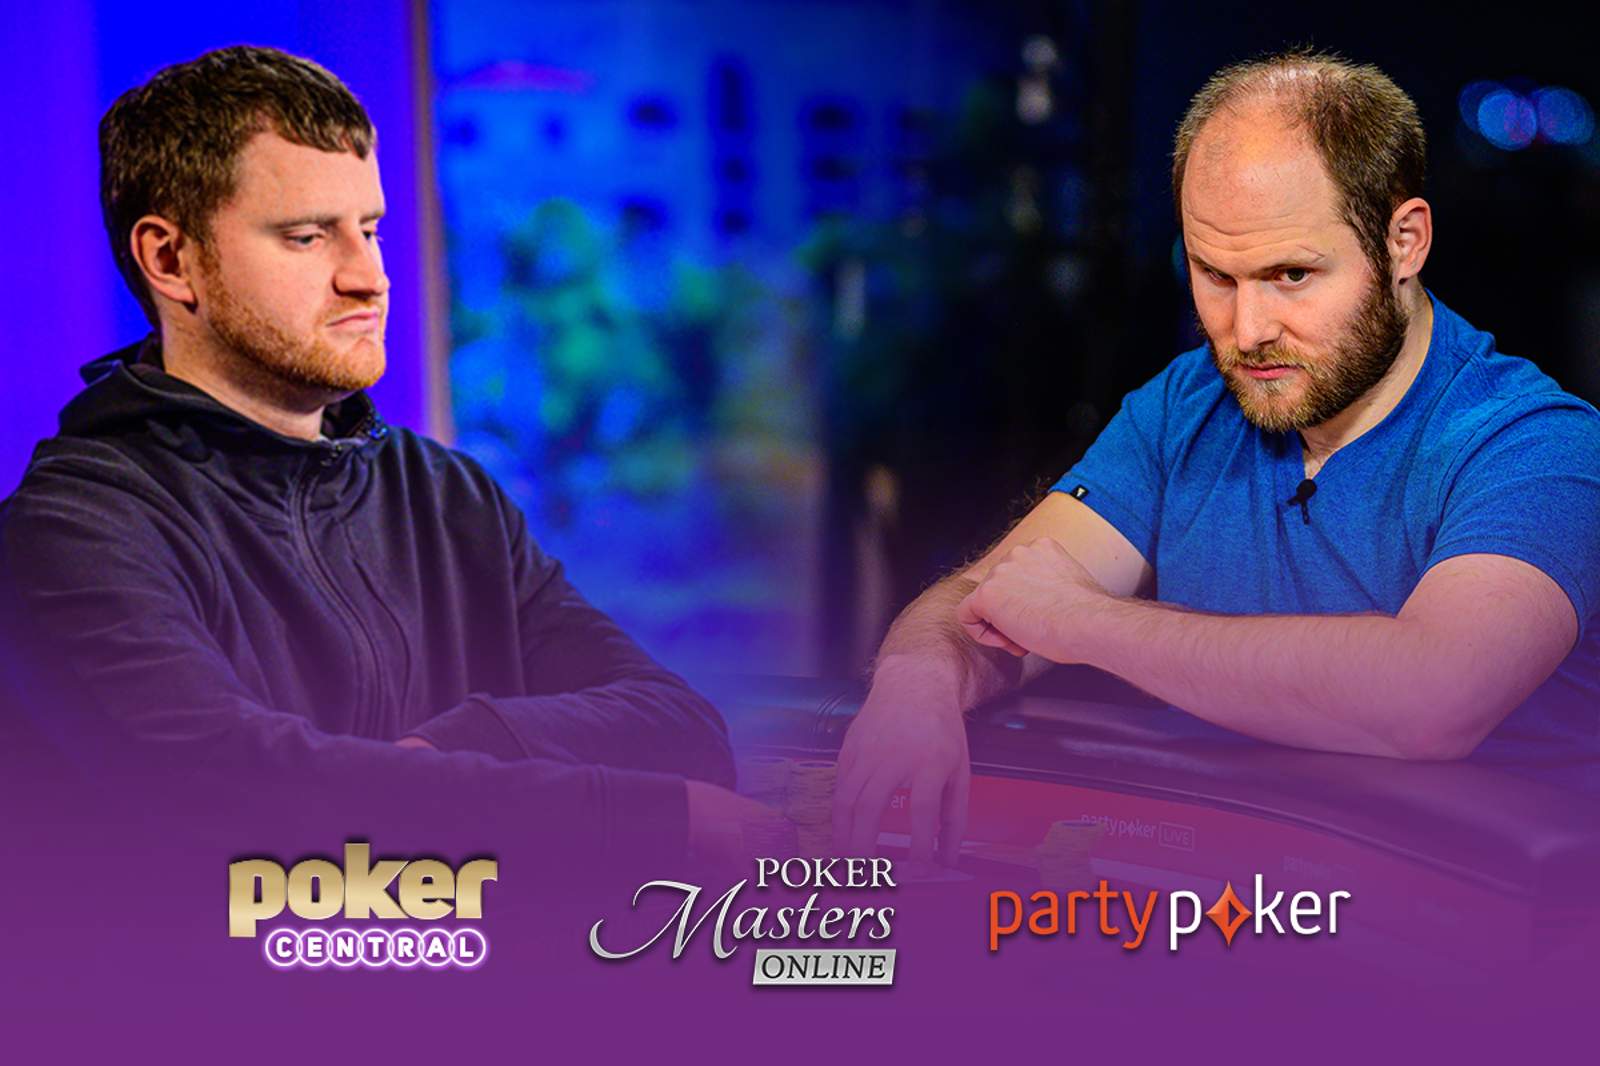 Poker Masters Online - Huge Night for Peters, O'Dwyer, and Greenwood